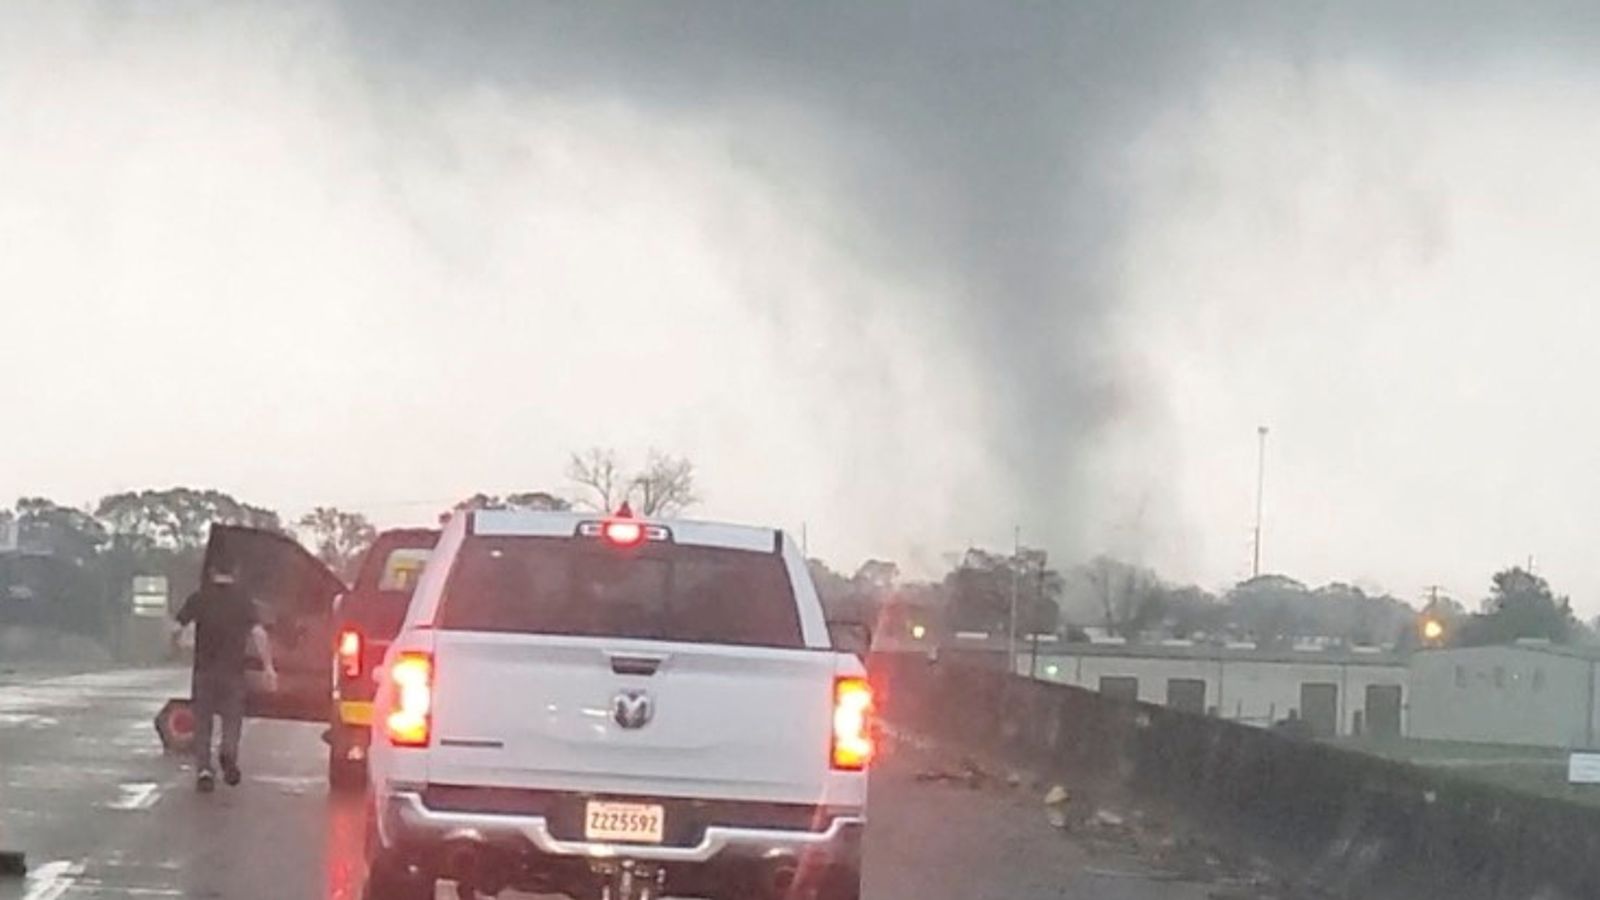 At least three dead as ice storms stir up tornadoes across the US